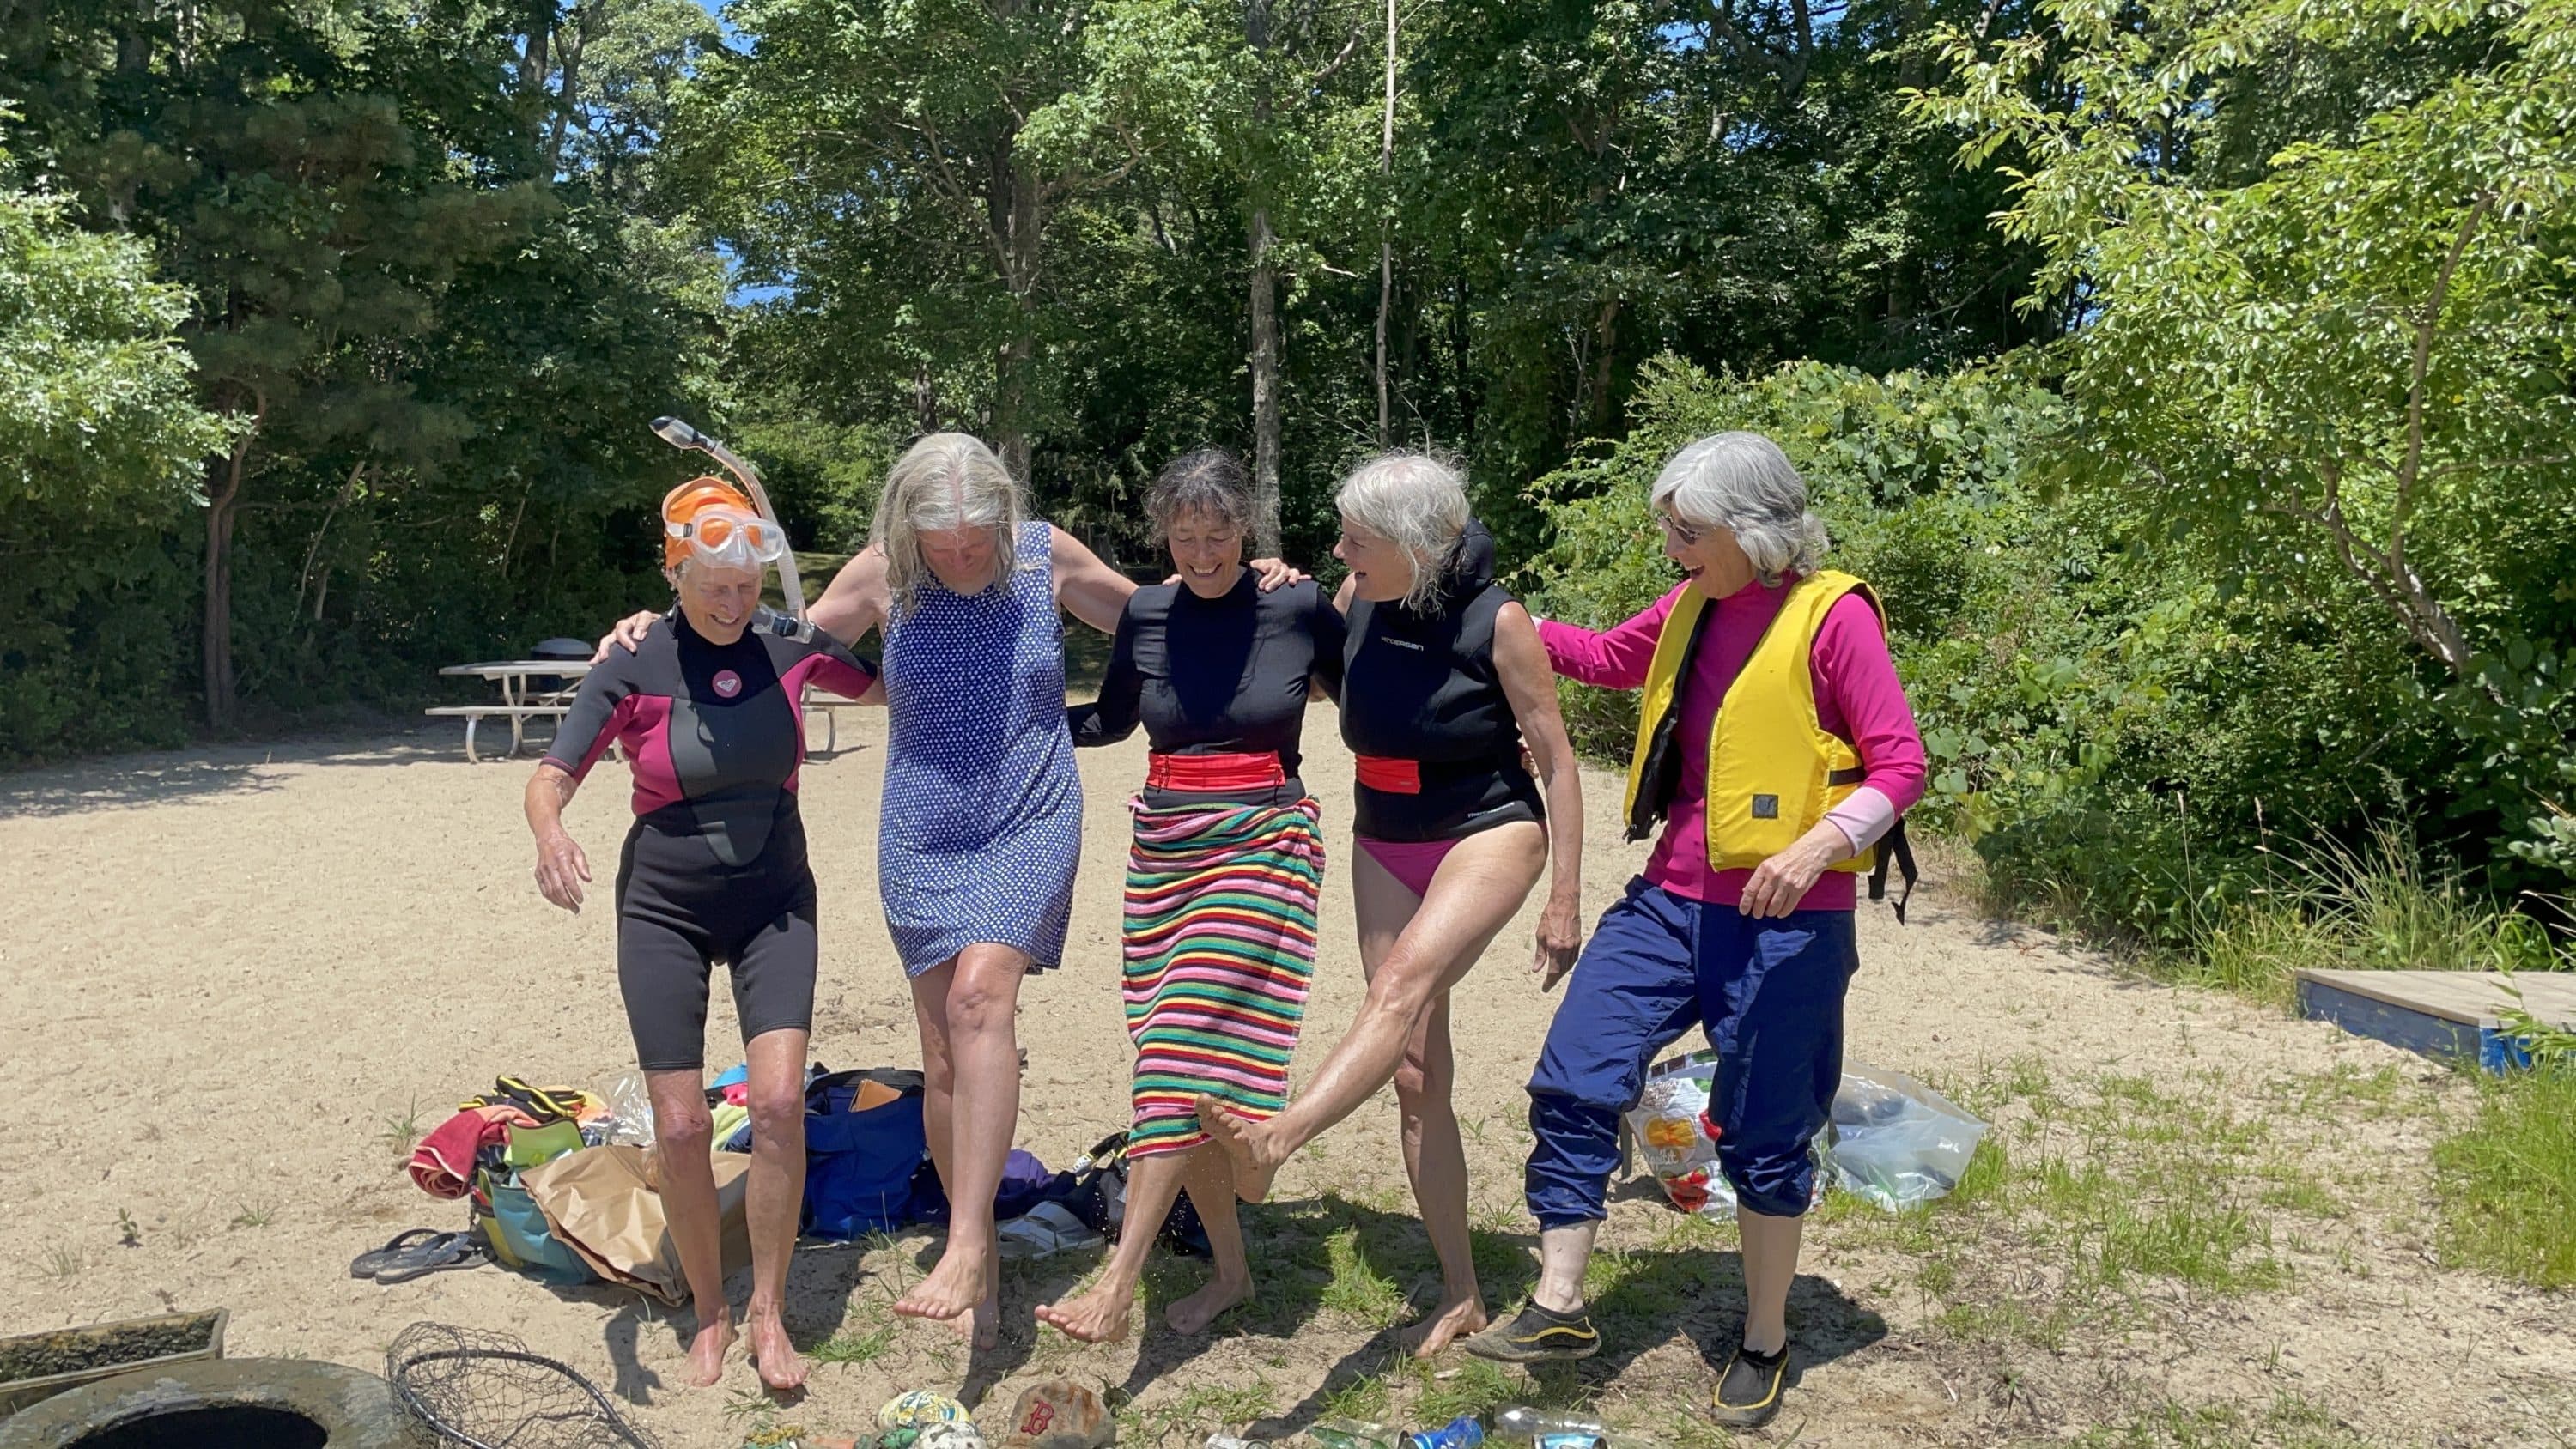 Five members of Old Ladies Against Underwater Garbage form a can-can line, as they wait for their photo to be taken in front of the trash they found. (Layne Fennell)